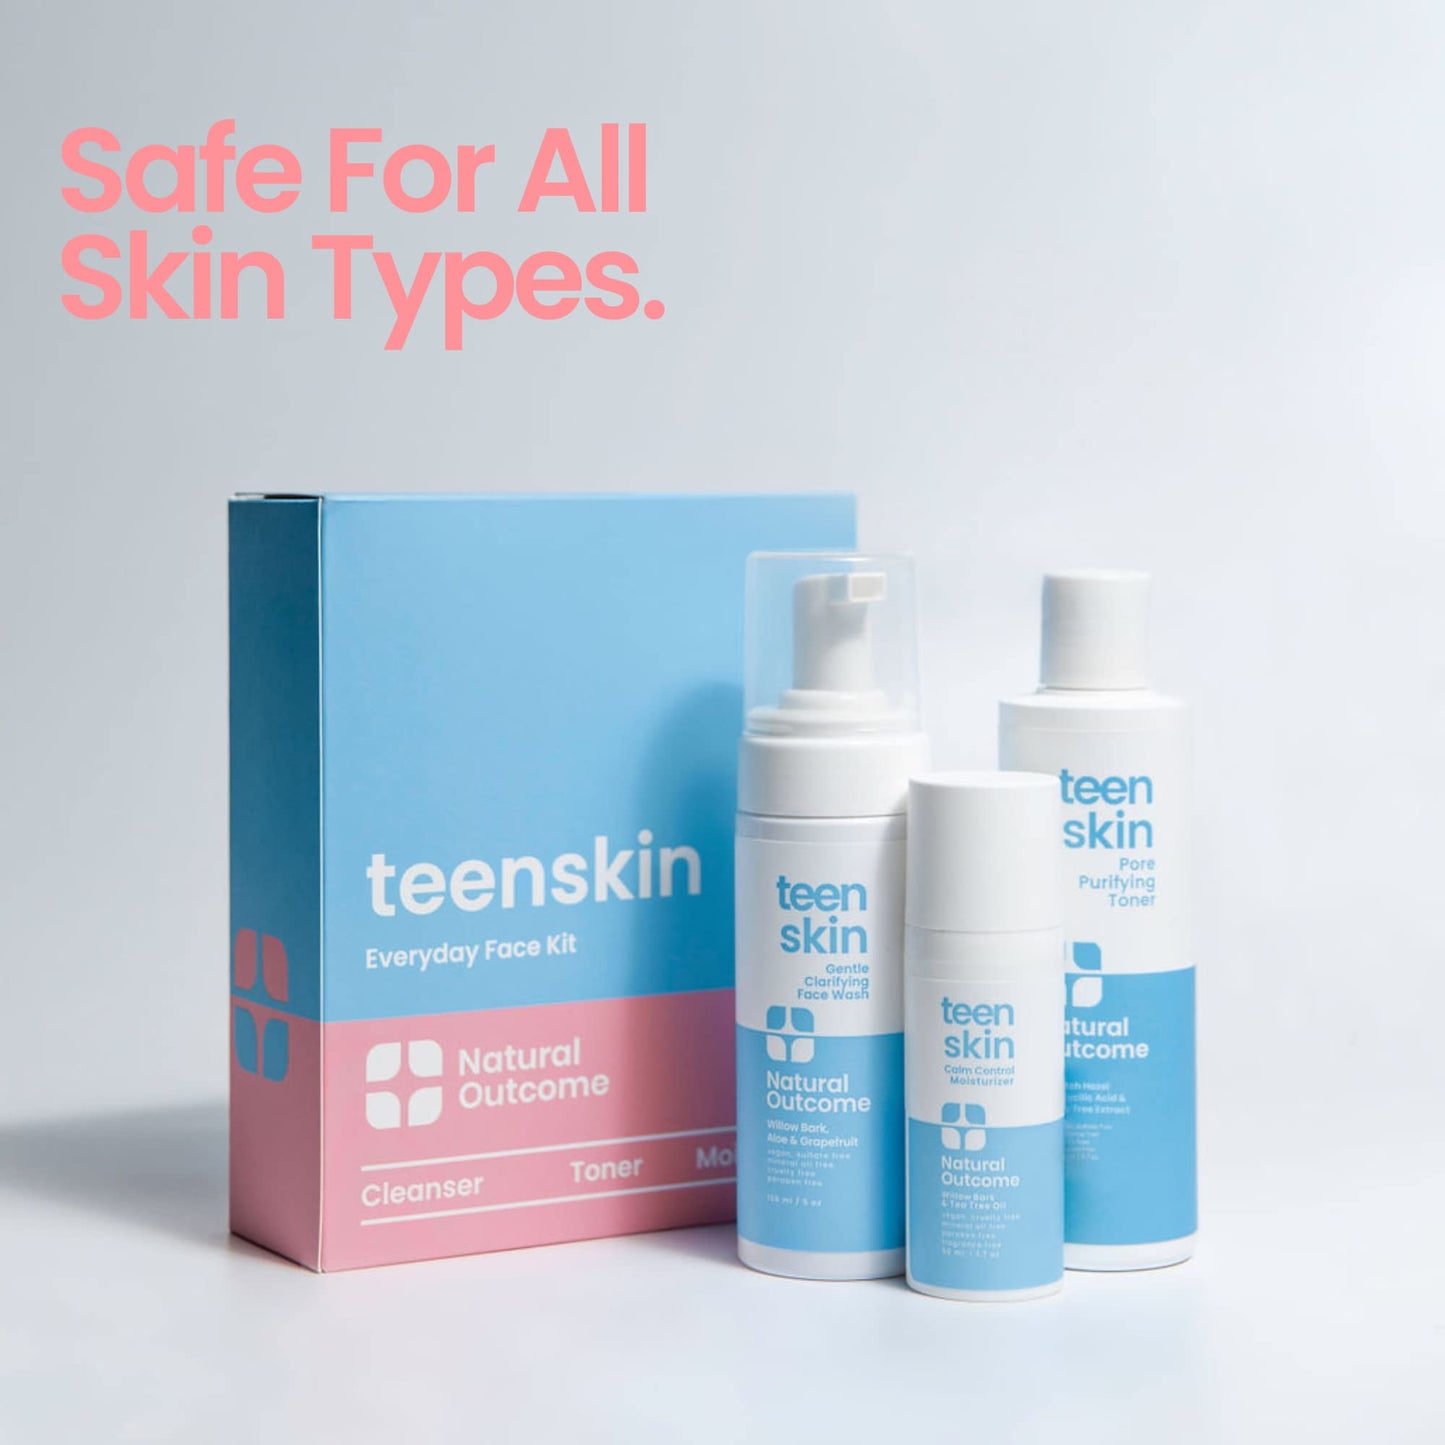 Natural Outcome Teen Skin 3-Step Skin Care Kit | Daily Boys & Girls Skin Care Regimen | Face Wash, Toner, & Moisturizer | Perfect for Teens Preteens & Kids Looking to Prevent Acne | 3 Pc